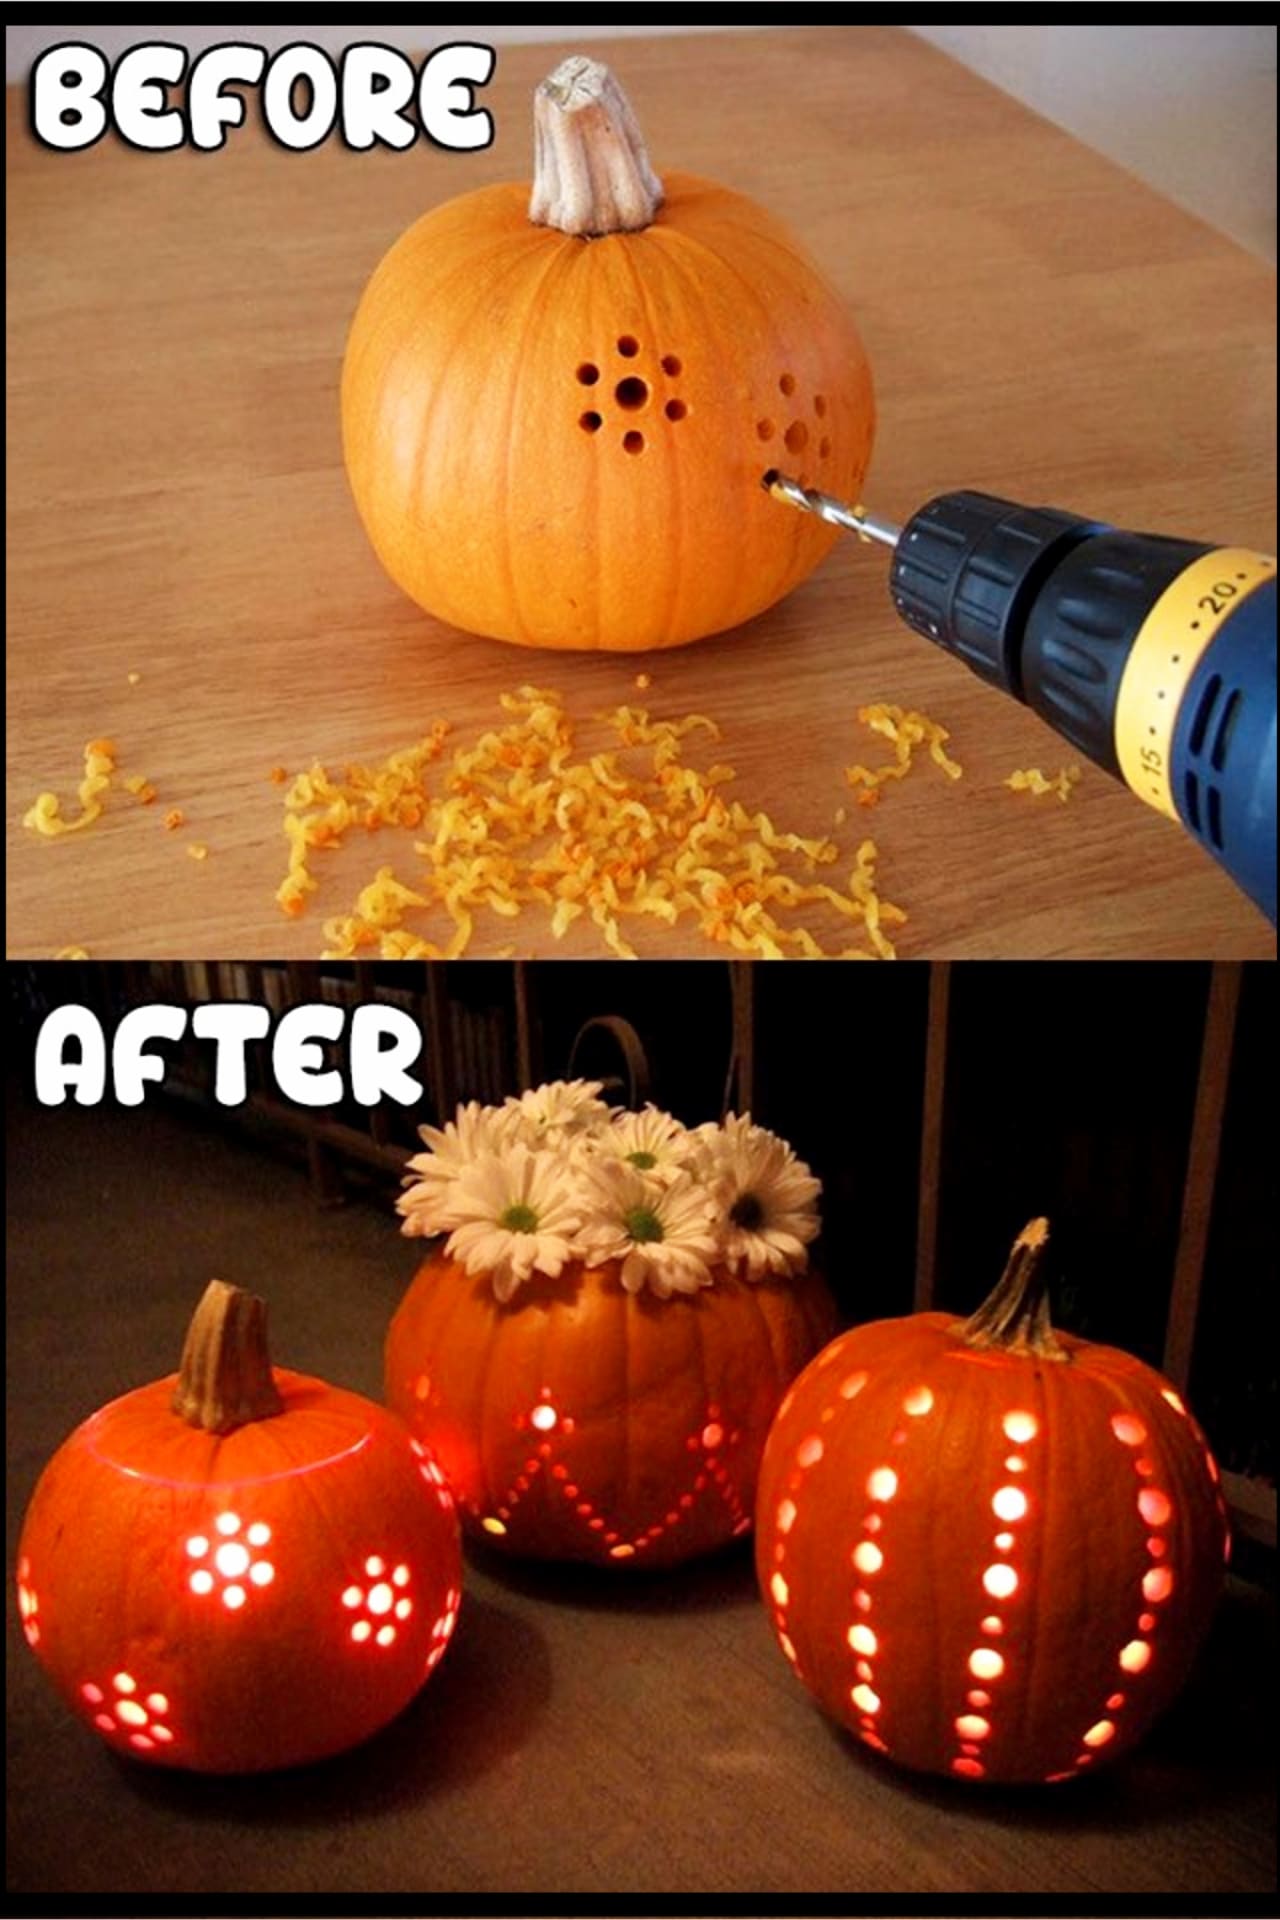 Pumpkin Decorating Ideas - creative ways to decorate pumpkins for Halloween, Thanksgiving or for Fall front porch decorating ideas